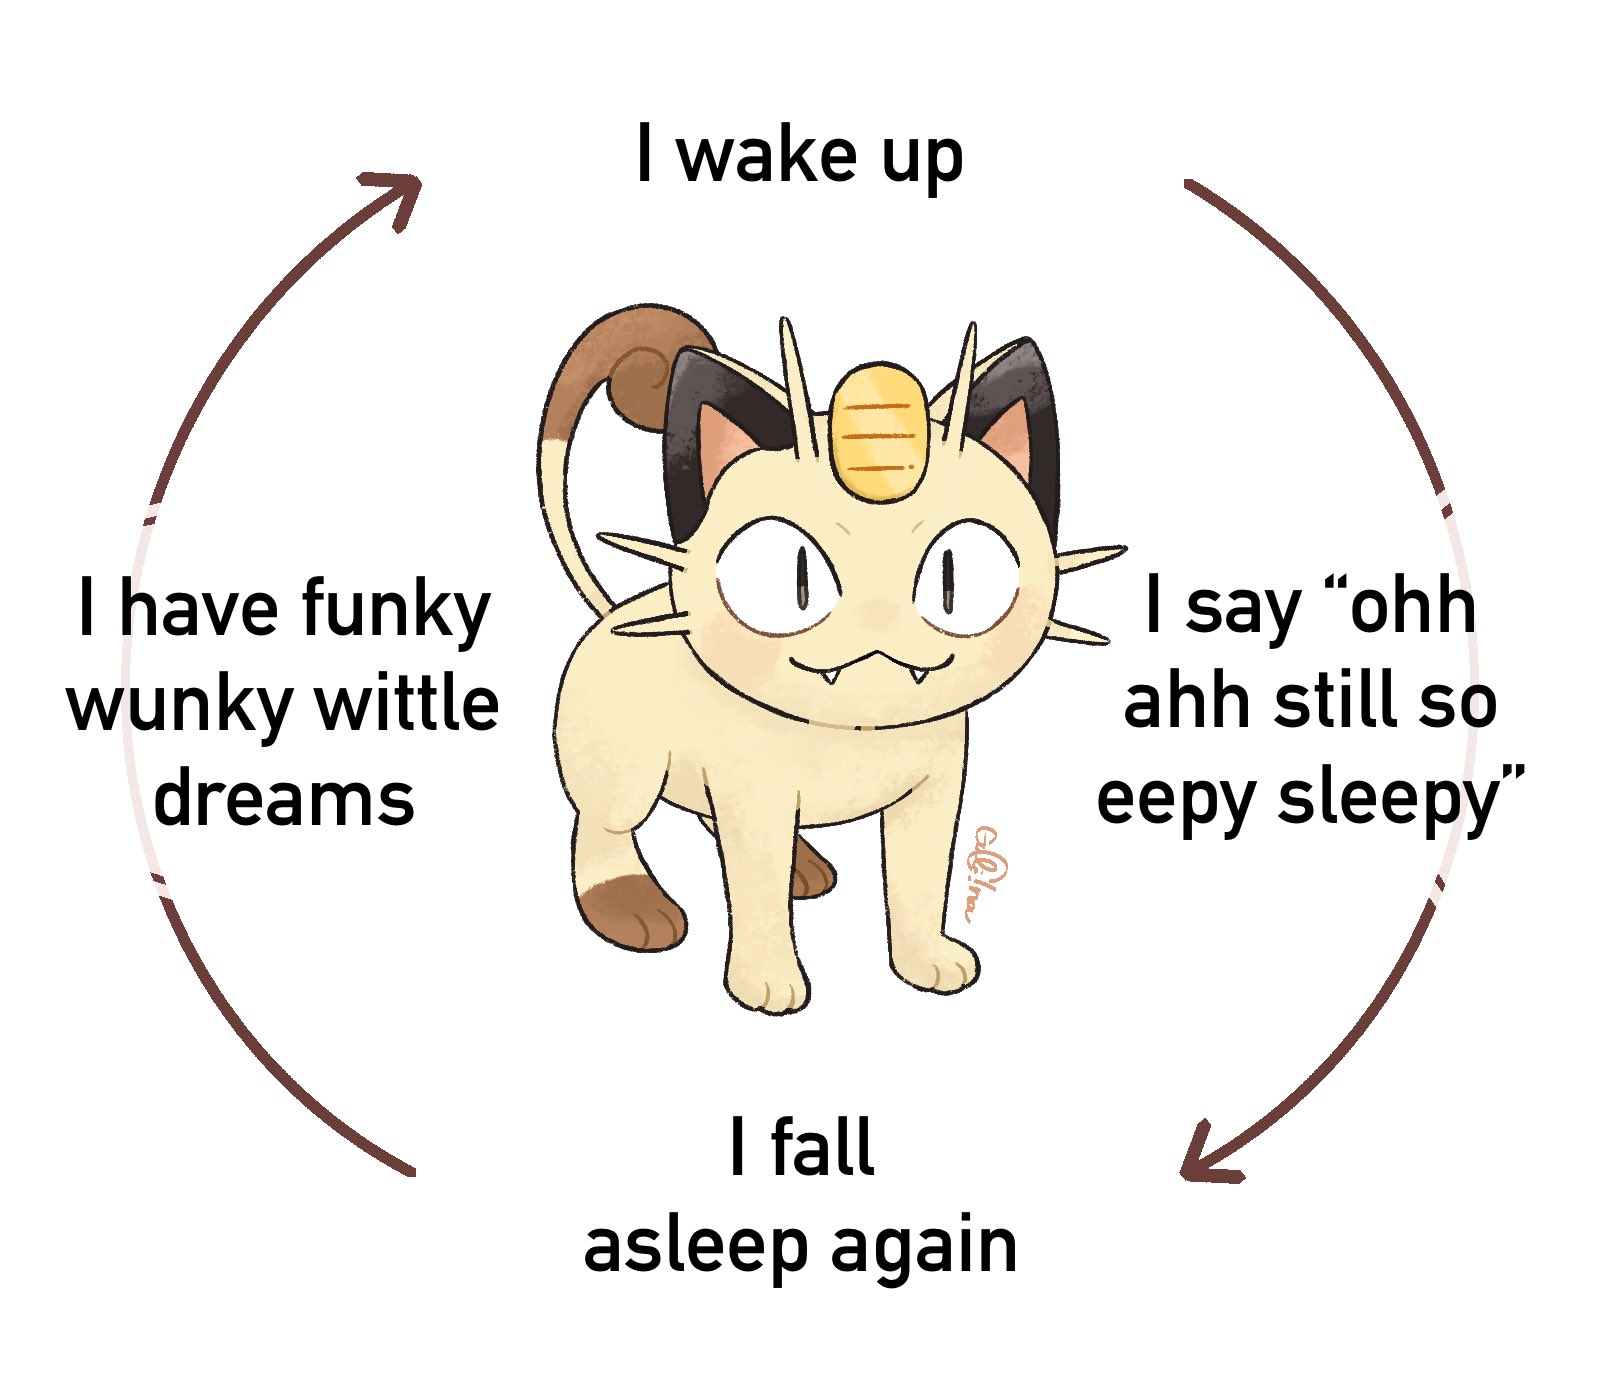 Meowth as cat memes by Snacck on DeviantArt